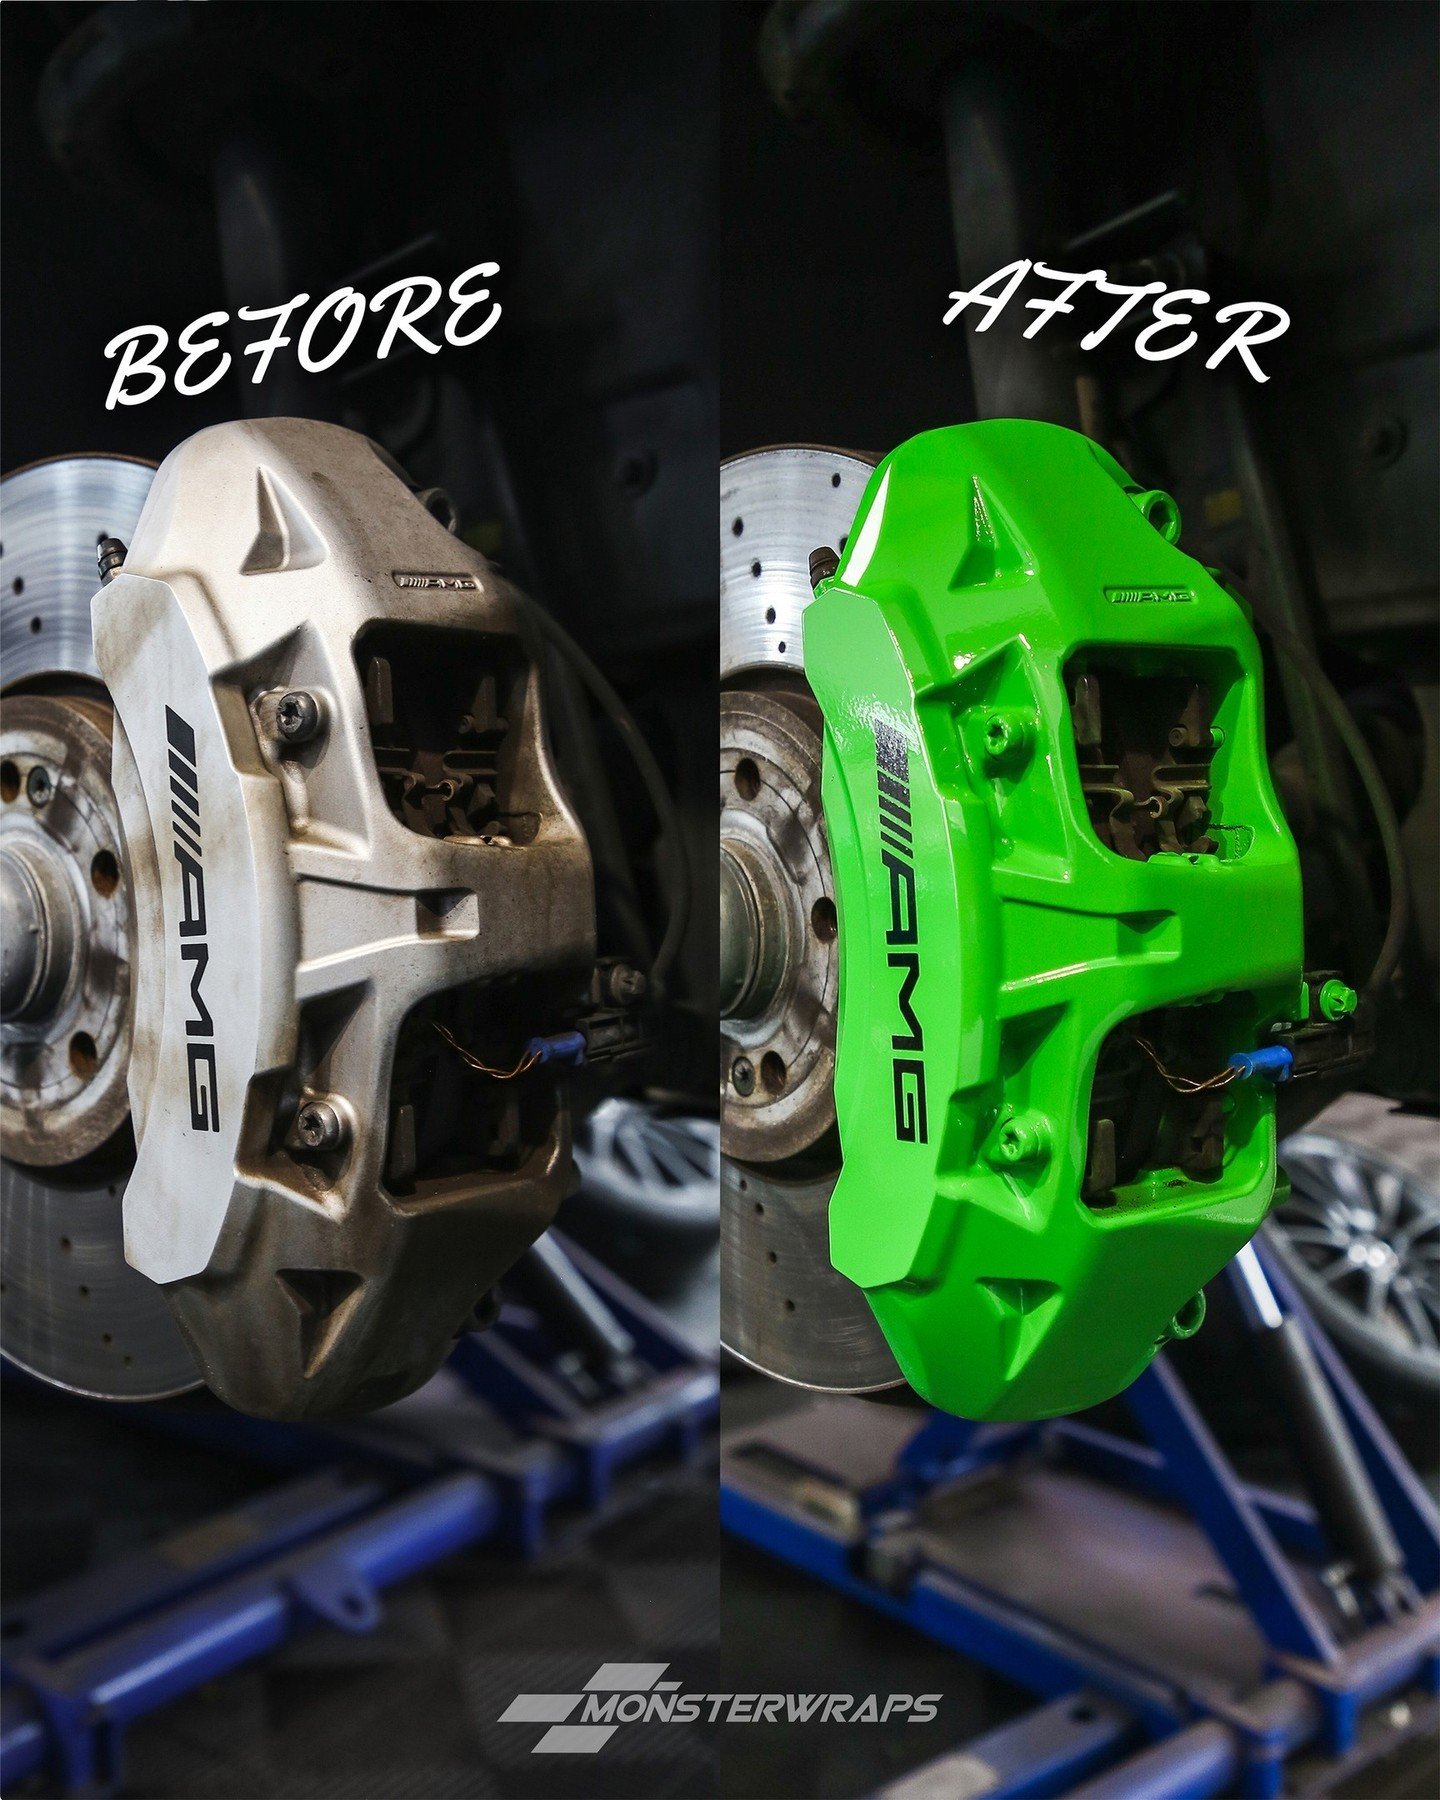 Mercedes AMG A35 x Gloss Alien Green⁠
⁠
⁠
⁠⬇️⬇️ Why have your calipers painted by us ⬇️⬇️⁠
⁠
⁠
😱 SUPER glossy, HIGH quality and ULTRA durable!⁠
⁠
⚠️ Gloss, Metallic, MATTE + FLUORESCENT finishes available to choose from! ⁠
⁠
2️⃣ Completed over 2 day